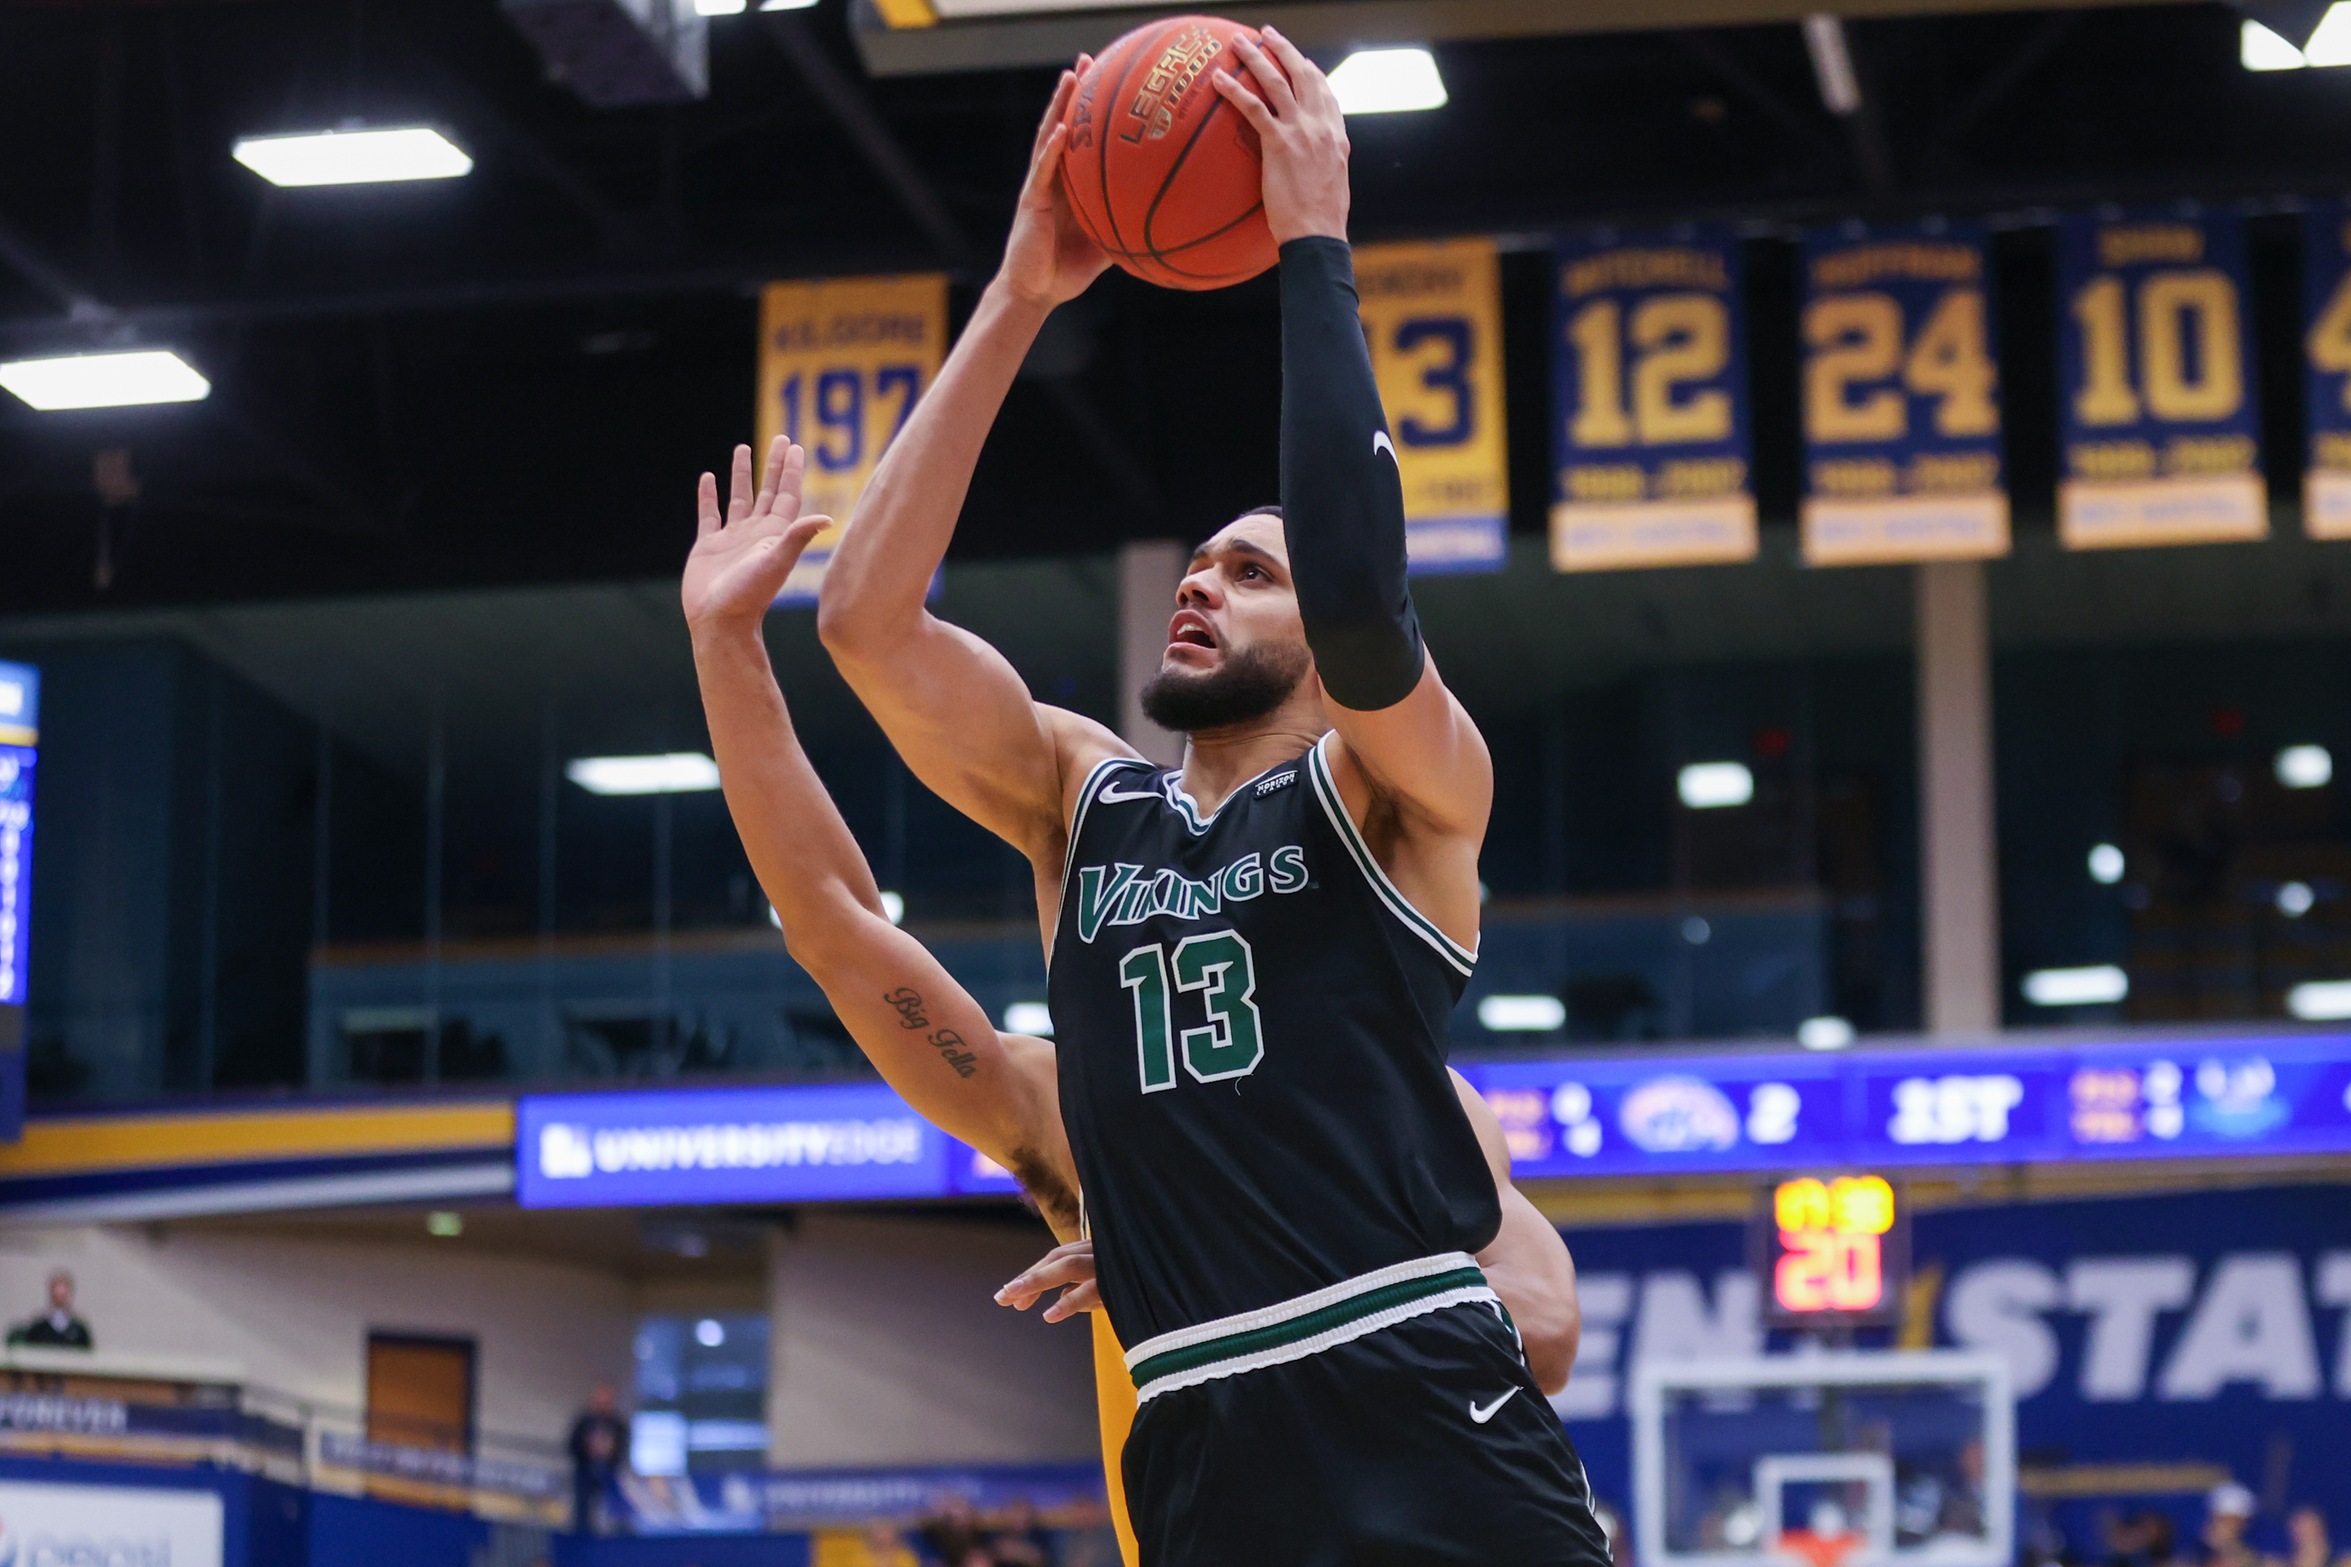 Cleveland State Men’s Basketball Drops Non-League Game at Kent State